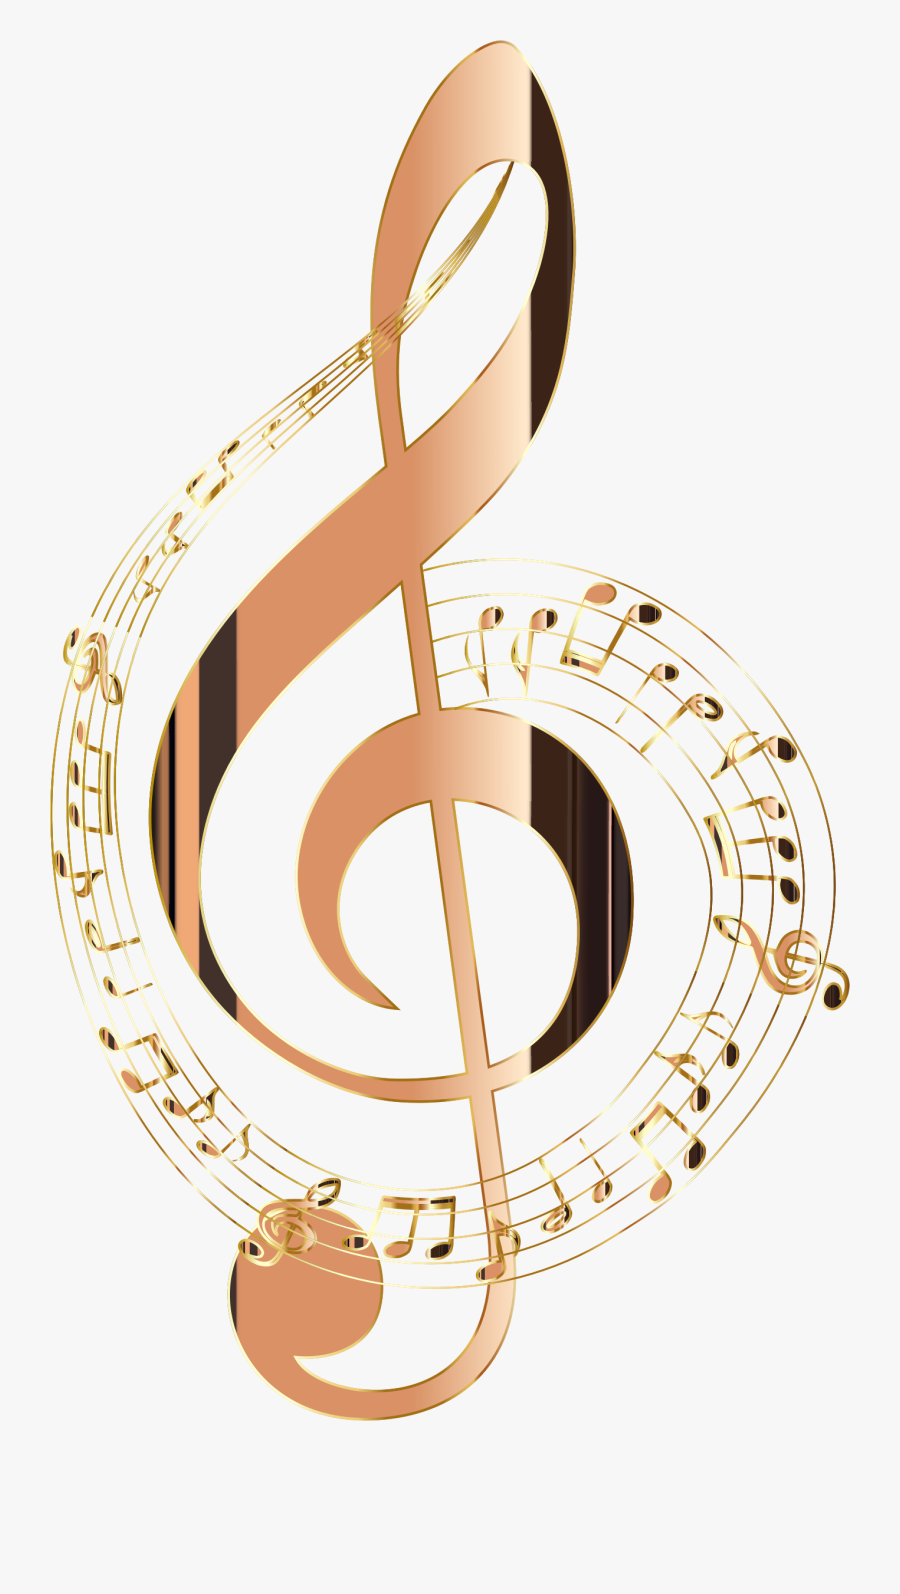 Transparent Music Note Clipart - Colorful Transparent Background Music Notes, Transparent Clipart